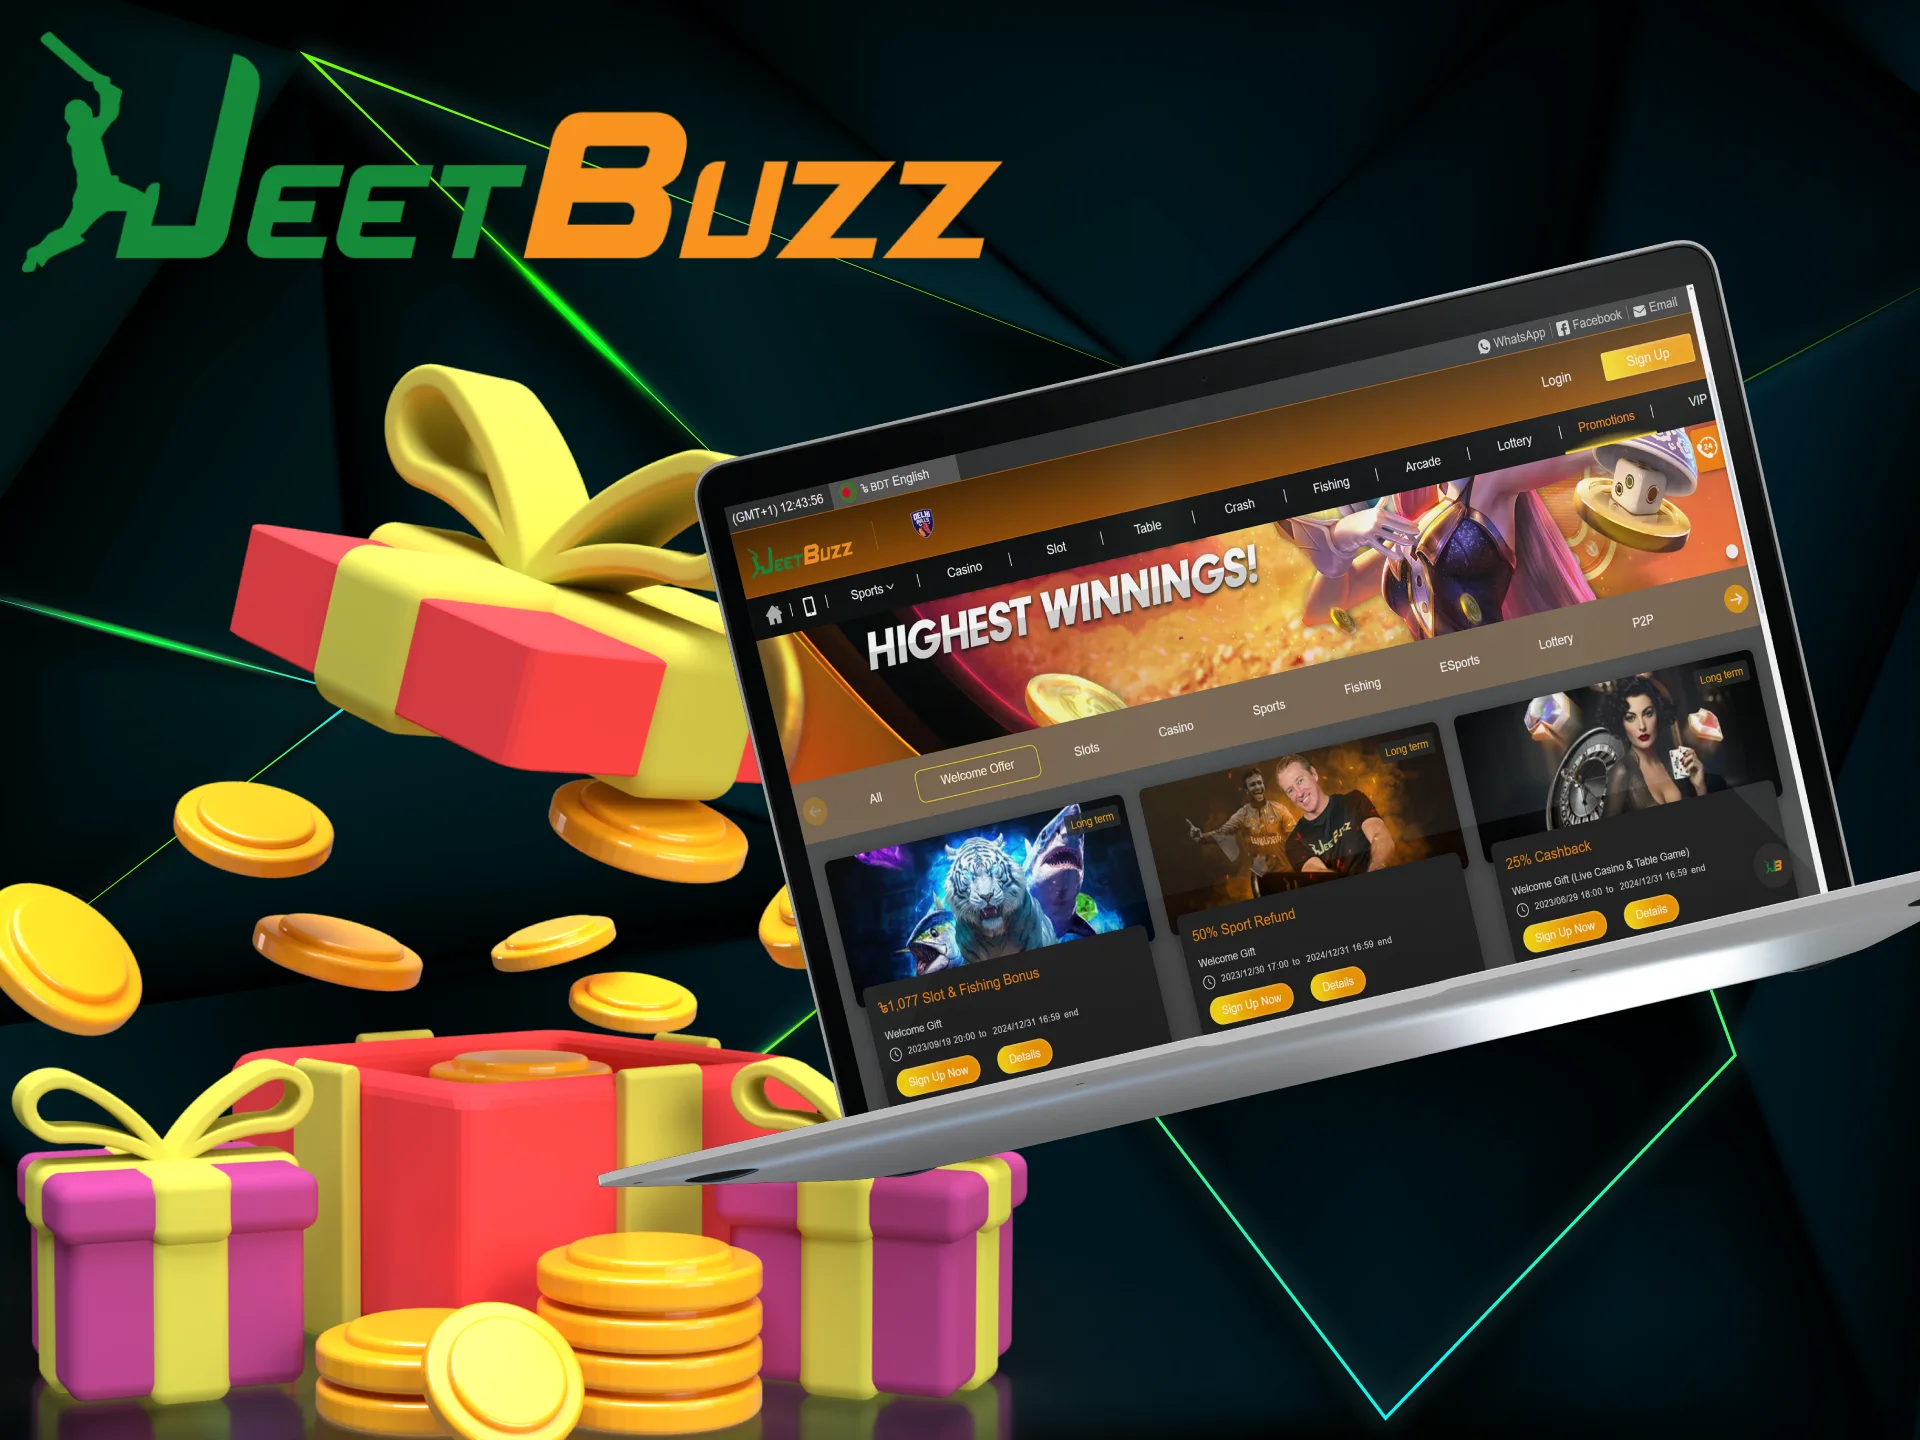 All new users can claim a welcome bonus from JeetBuzz Bangladesh after registration. This bonus can be used for both sports betting and casino games!